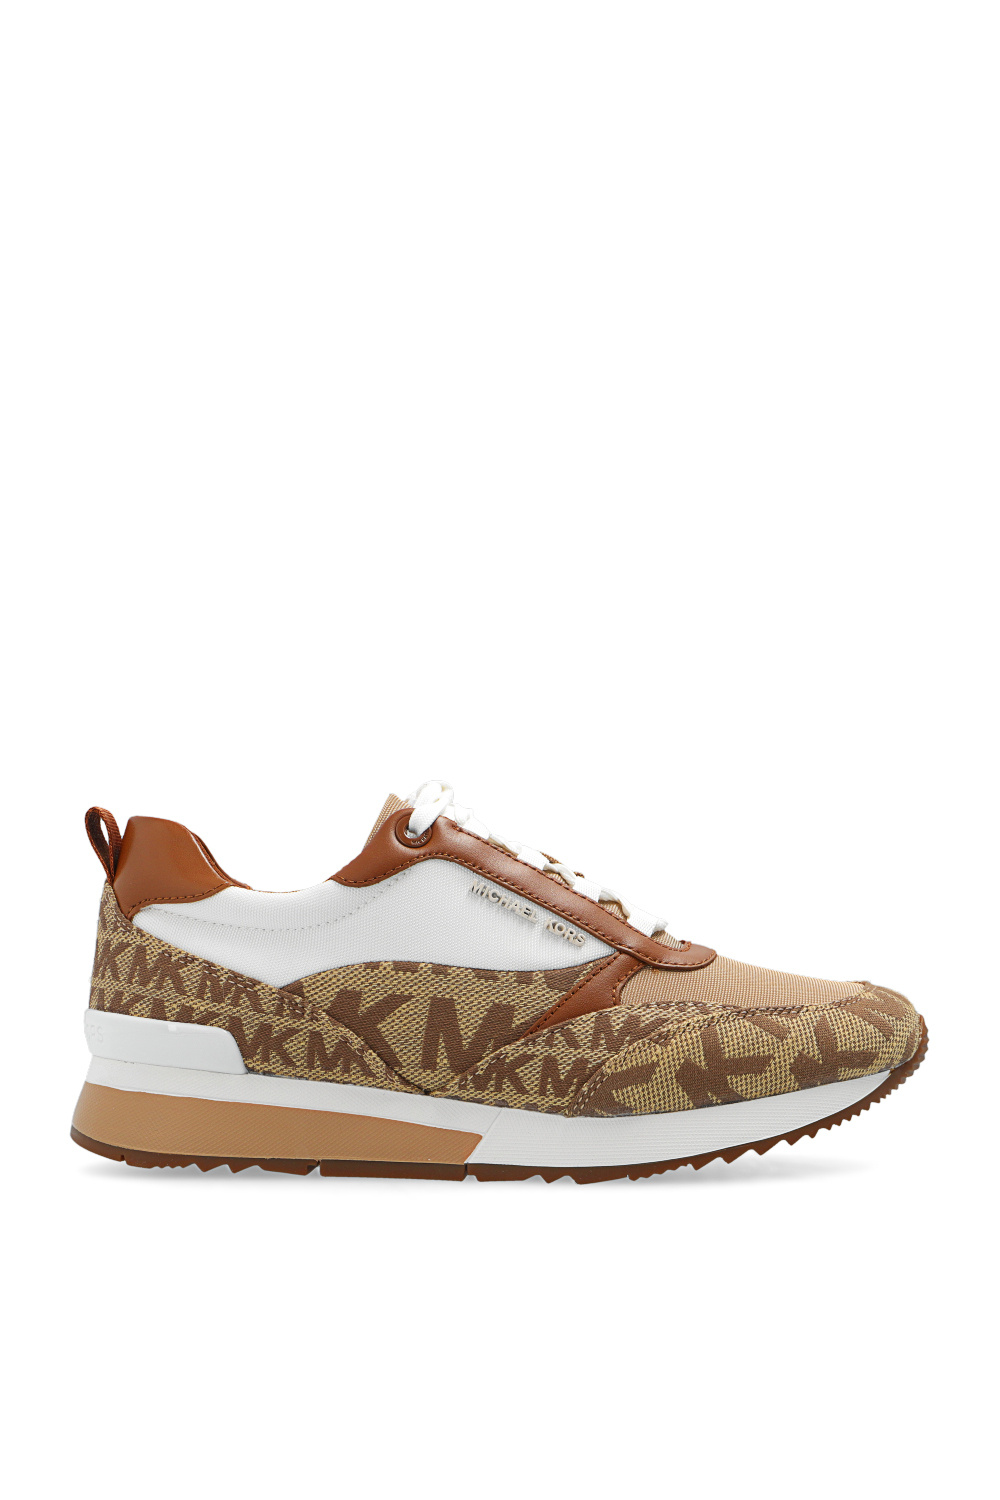 Michael Kors Sneakers for Women  Shop Now at Farfetch Canada